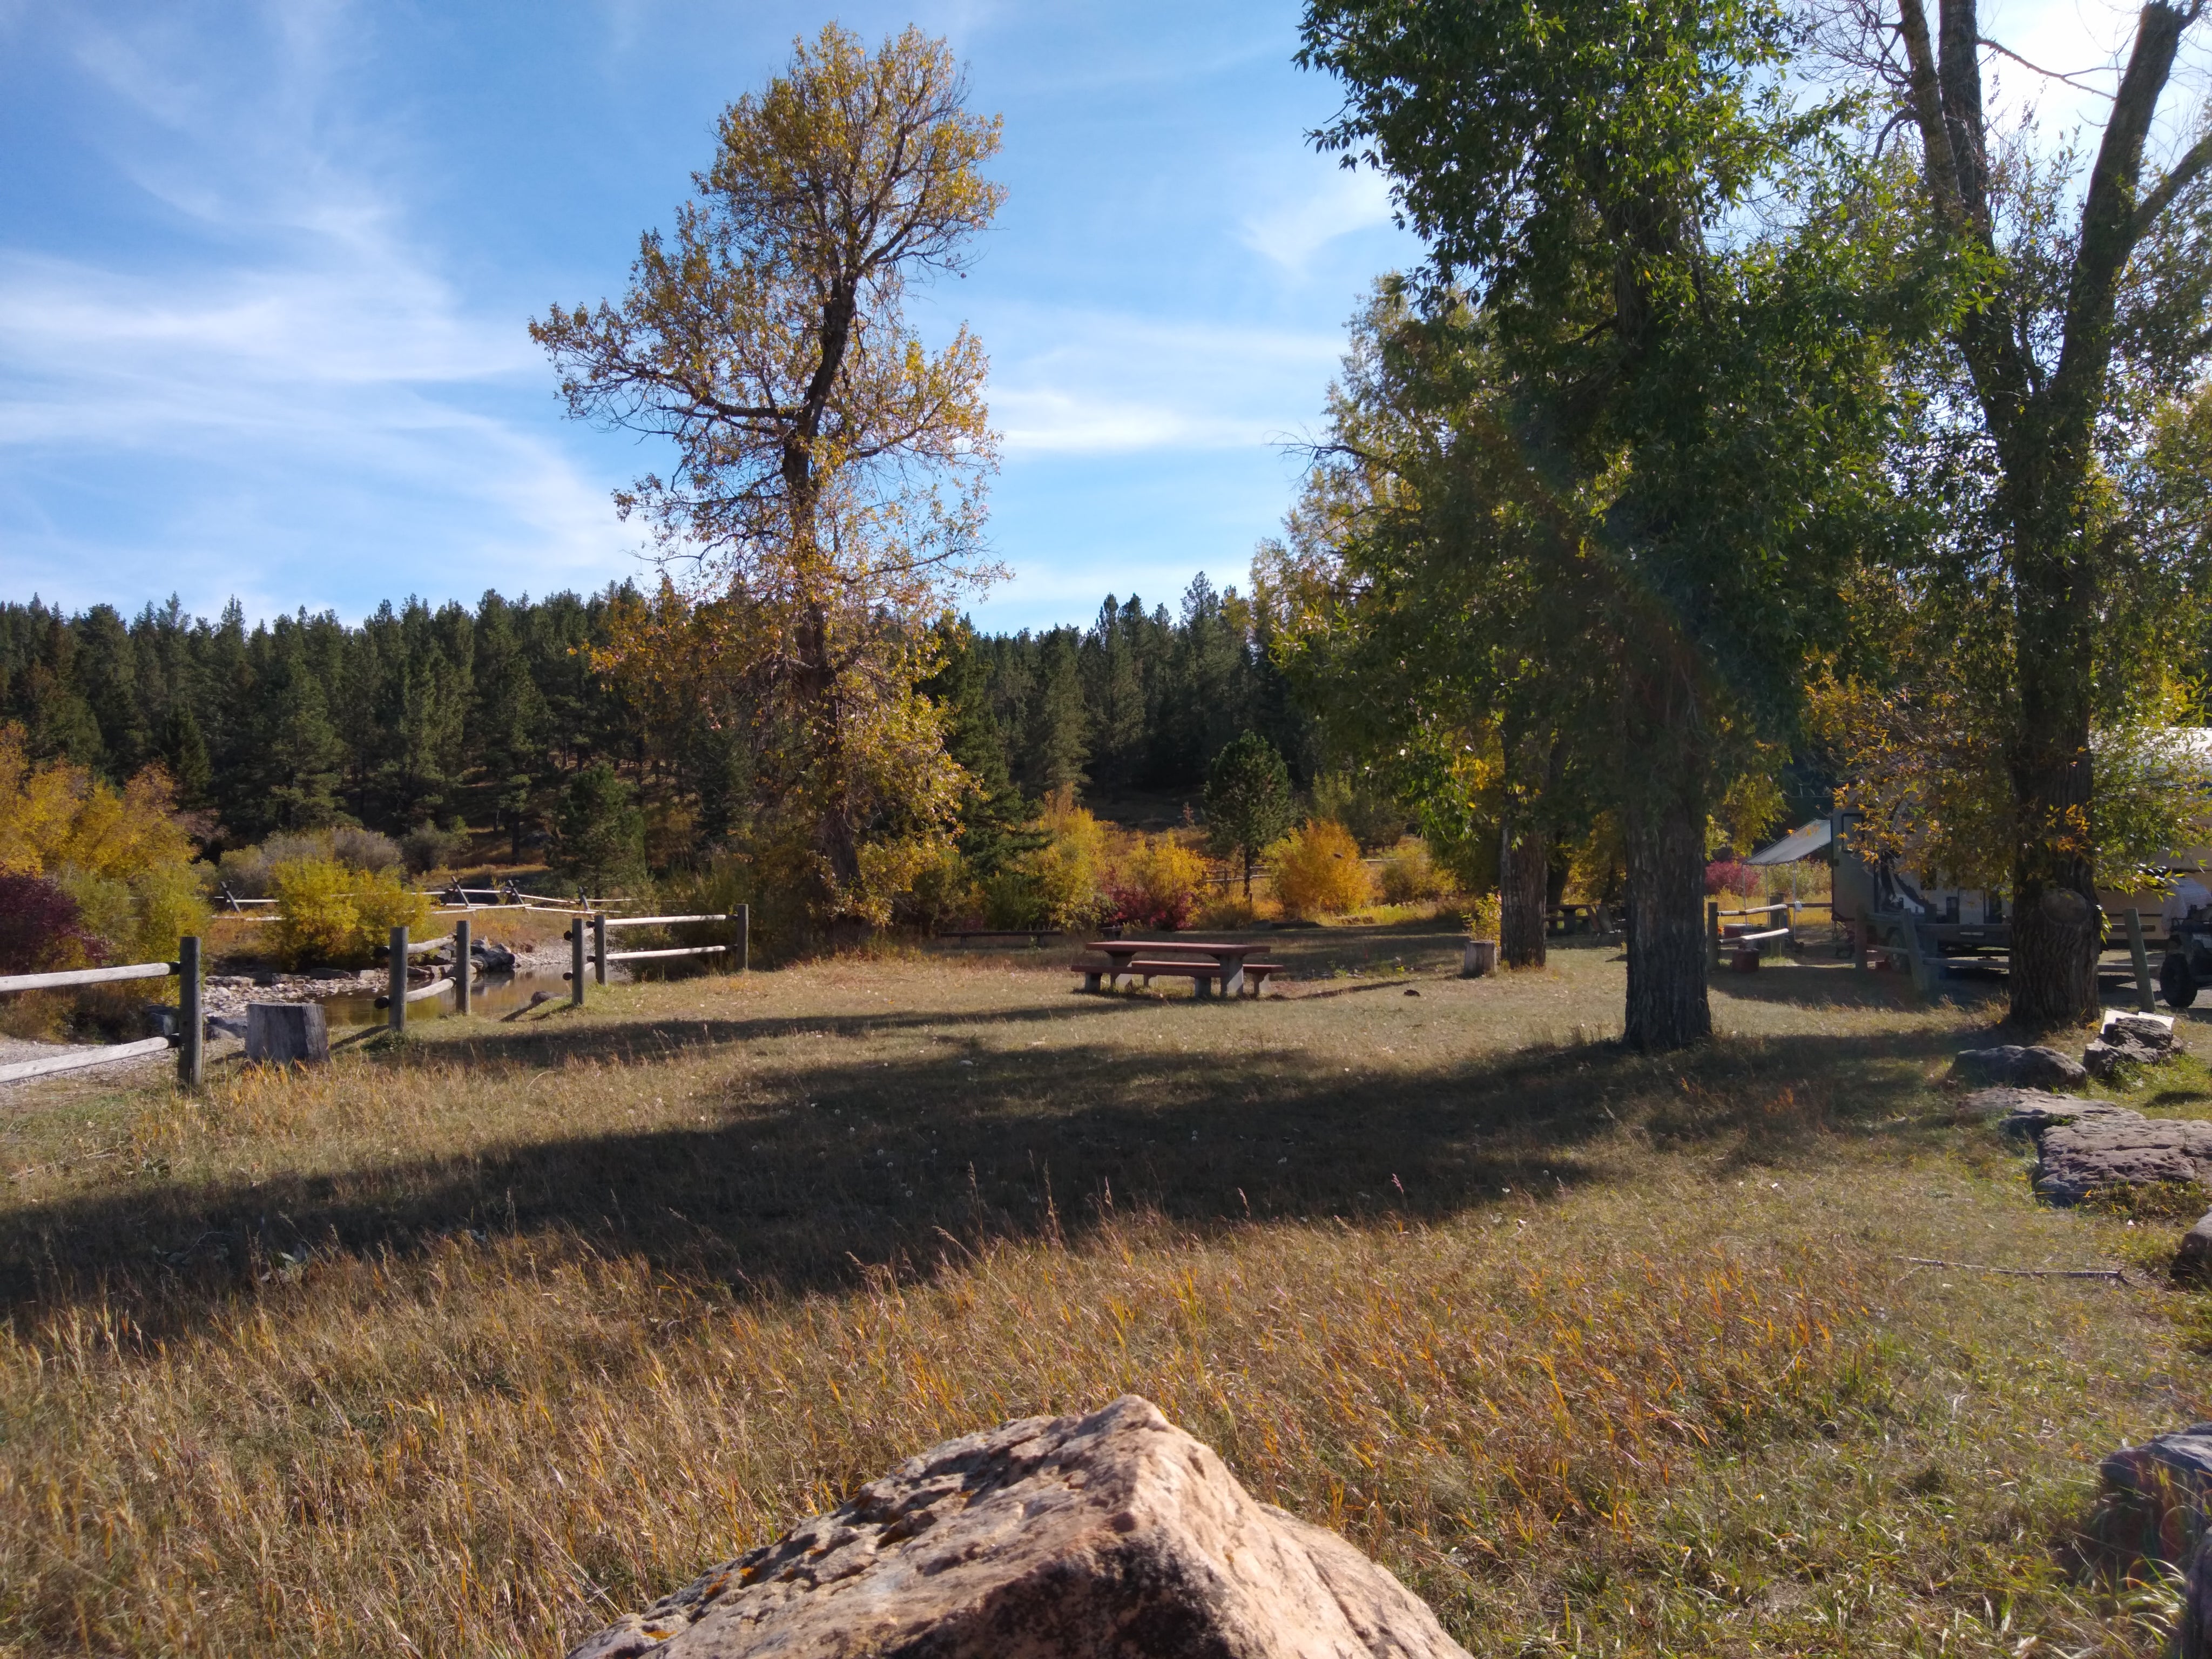 Camper submitted image from Judith Station Day Use Area/Bill & Ruth Korell Memorial Campground - 4